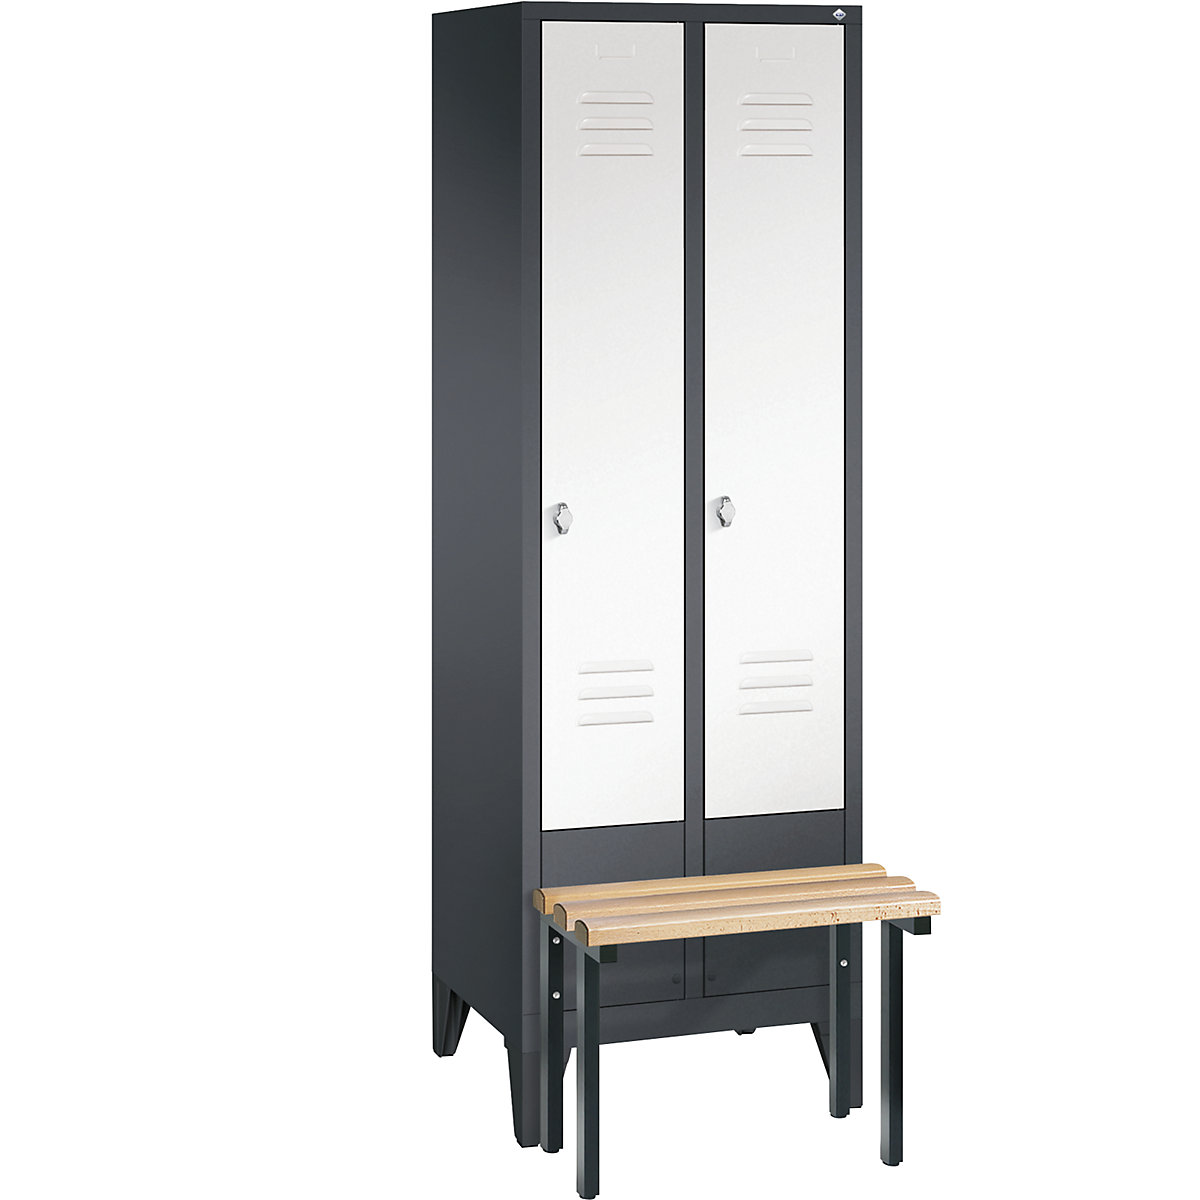 CLASSIC cloakroom locker with bench mounted in front – C+P, 2 compartments, compartment width 300 mm, black grey / traffic white-8